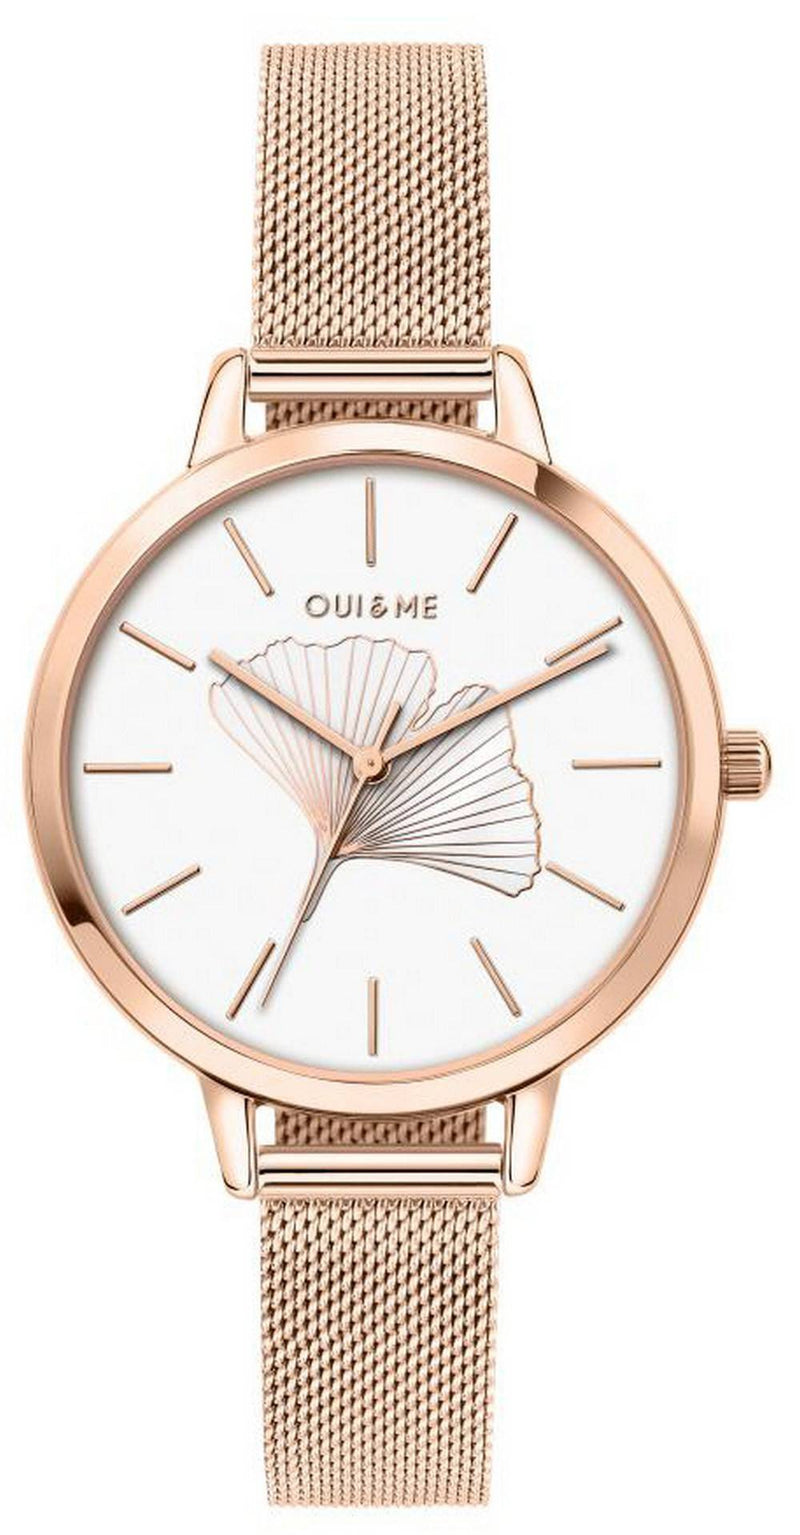 Oui  Me Amourette White Dial Rose Gold Tone Stainless Steel Quartz ME010042 Women's Watch